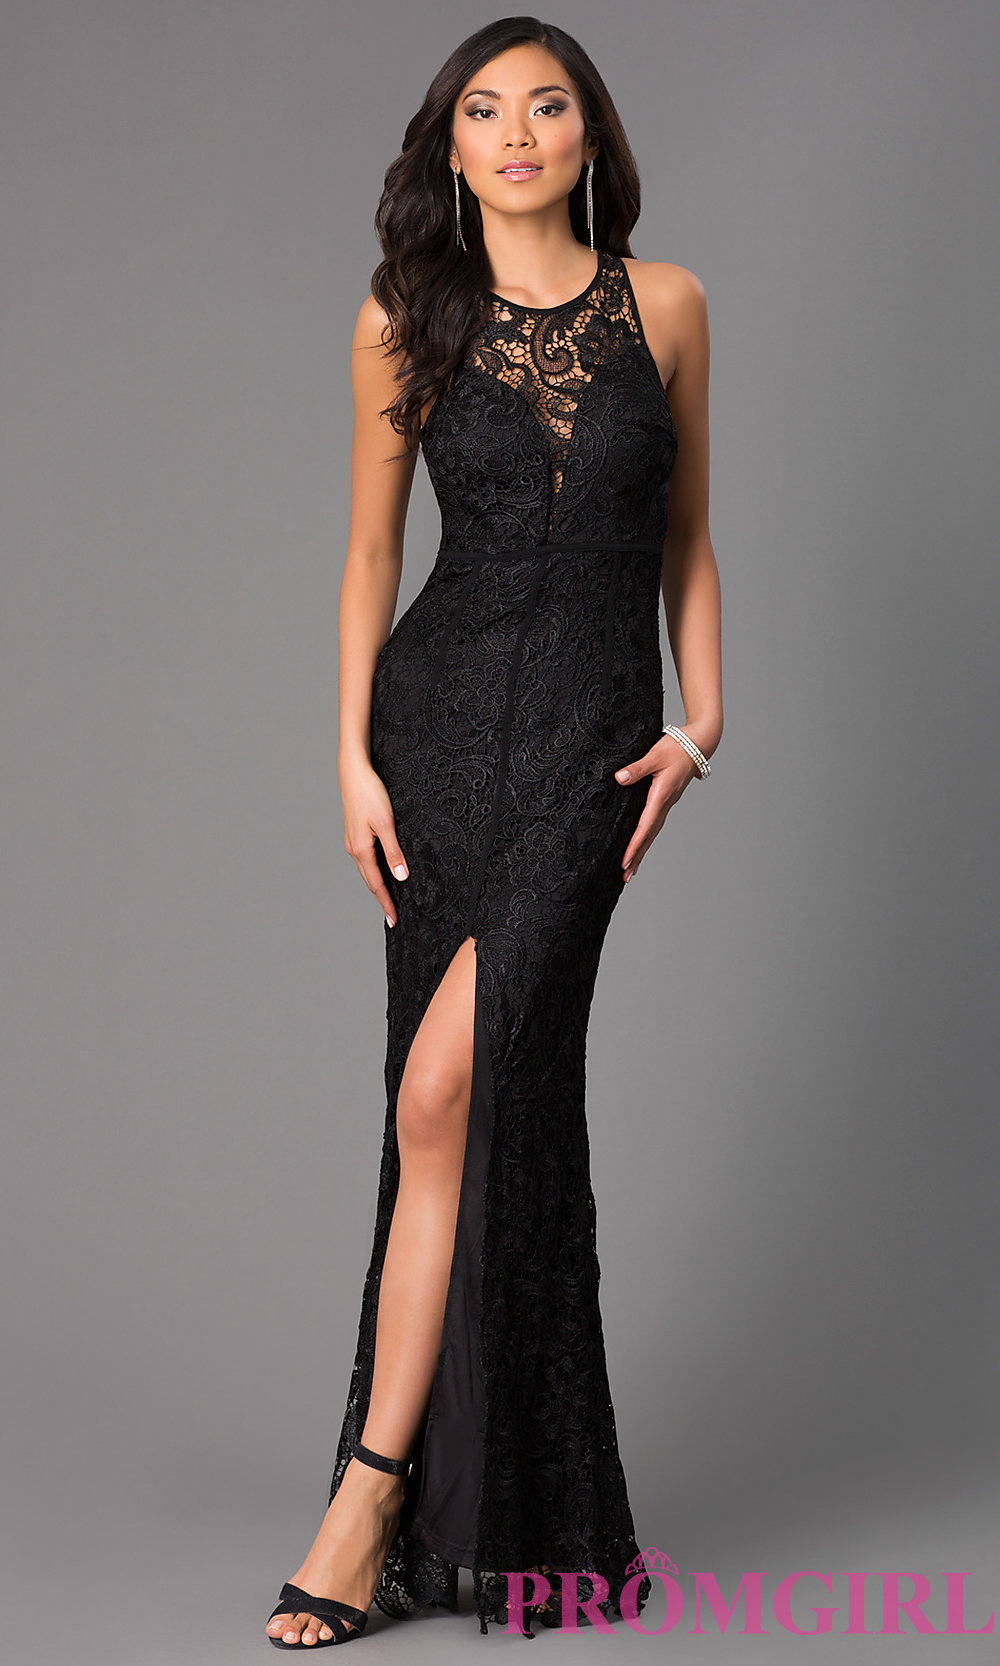 long lace dress hover to zoom · image of long lace sleeveless dress ... FBAUELB